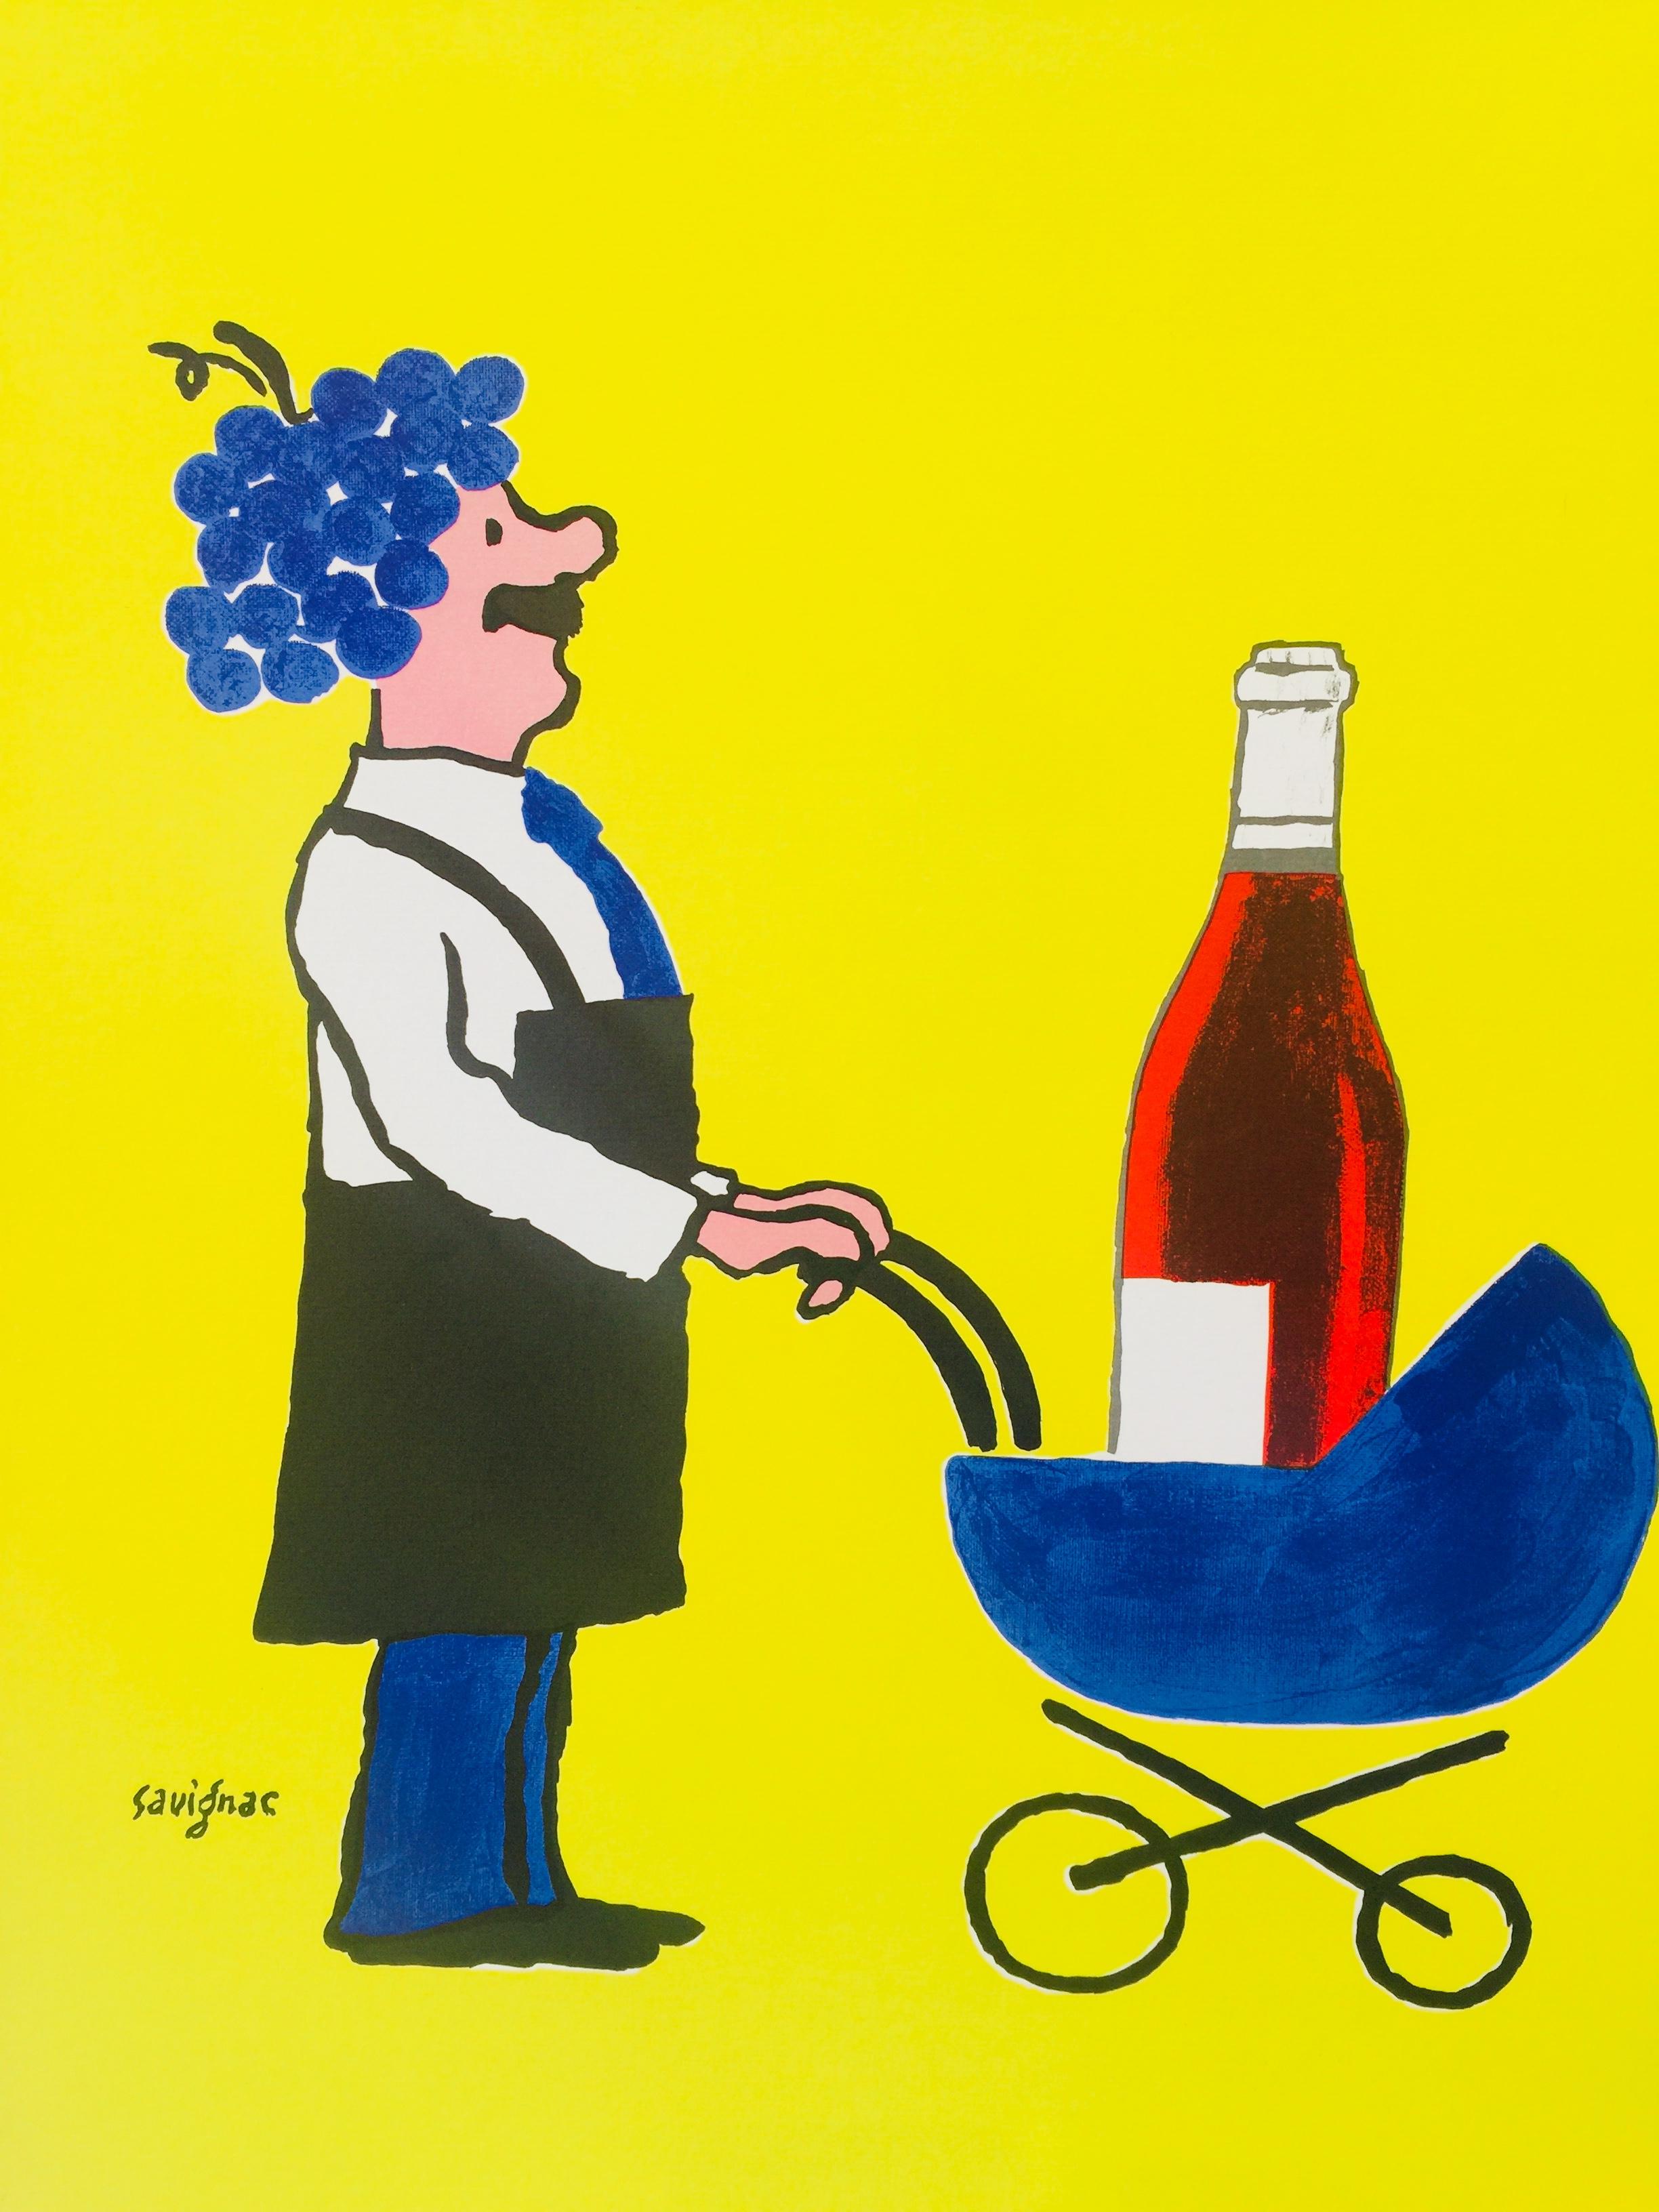 Original vintage French wine poster by Savignac 'Buvons Ici Le Vin Nouveau' 1993

A celebration of new wine, buvons le vin nouveau! Each year the third Thursday in November marks the release of the Beaujolais Nouveaux – a wine made only from